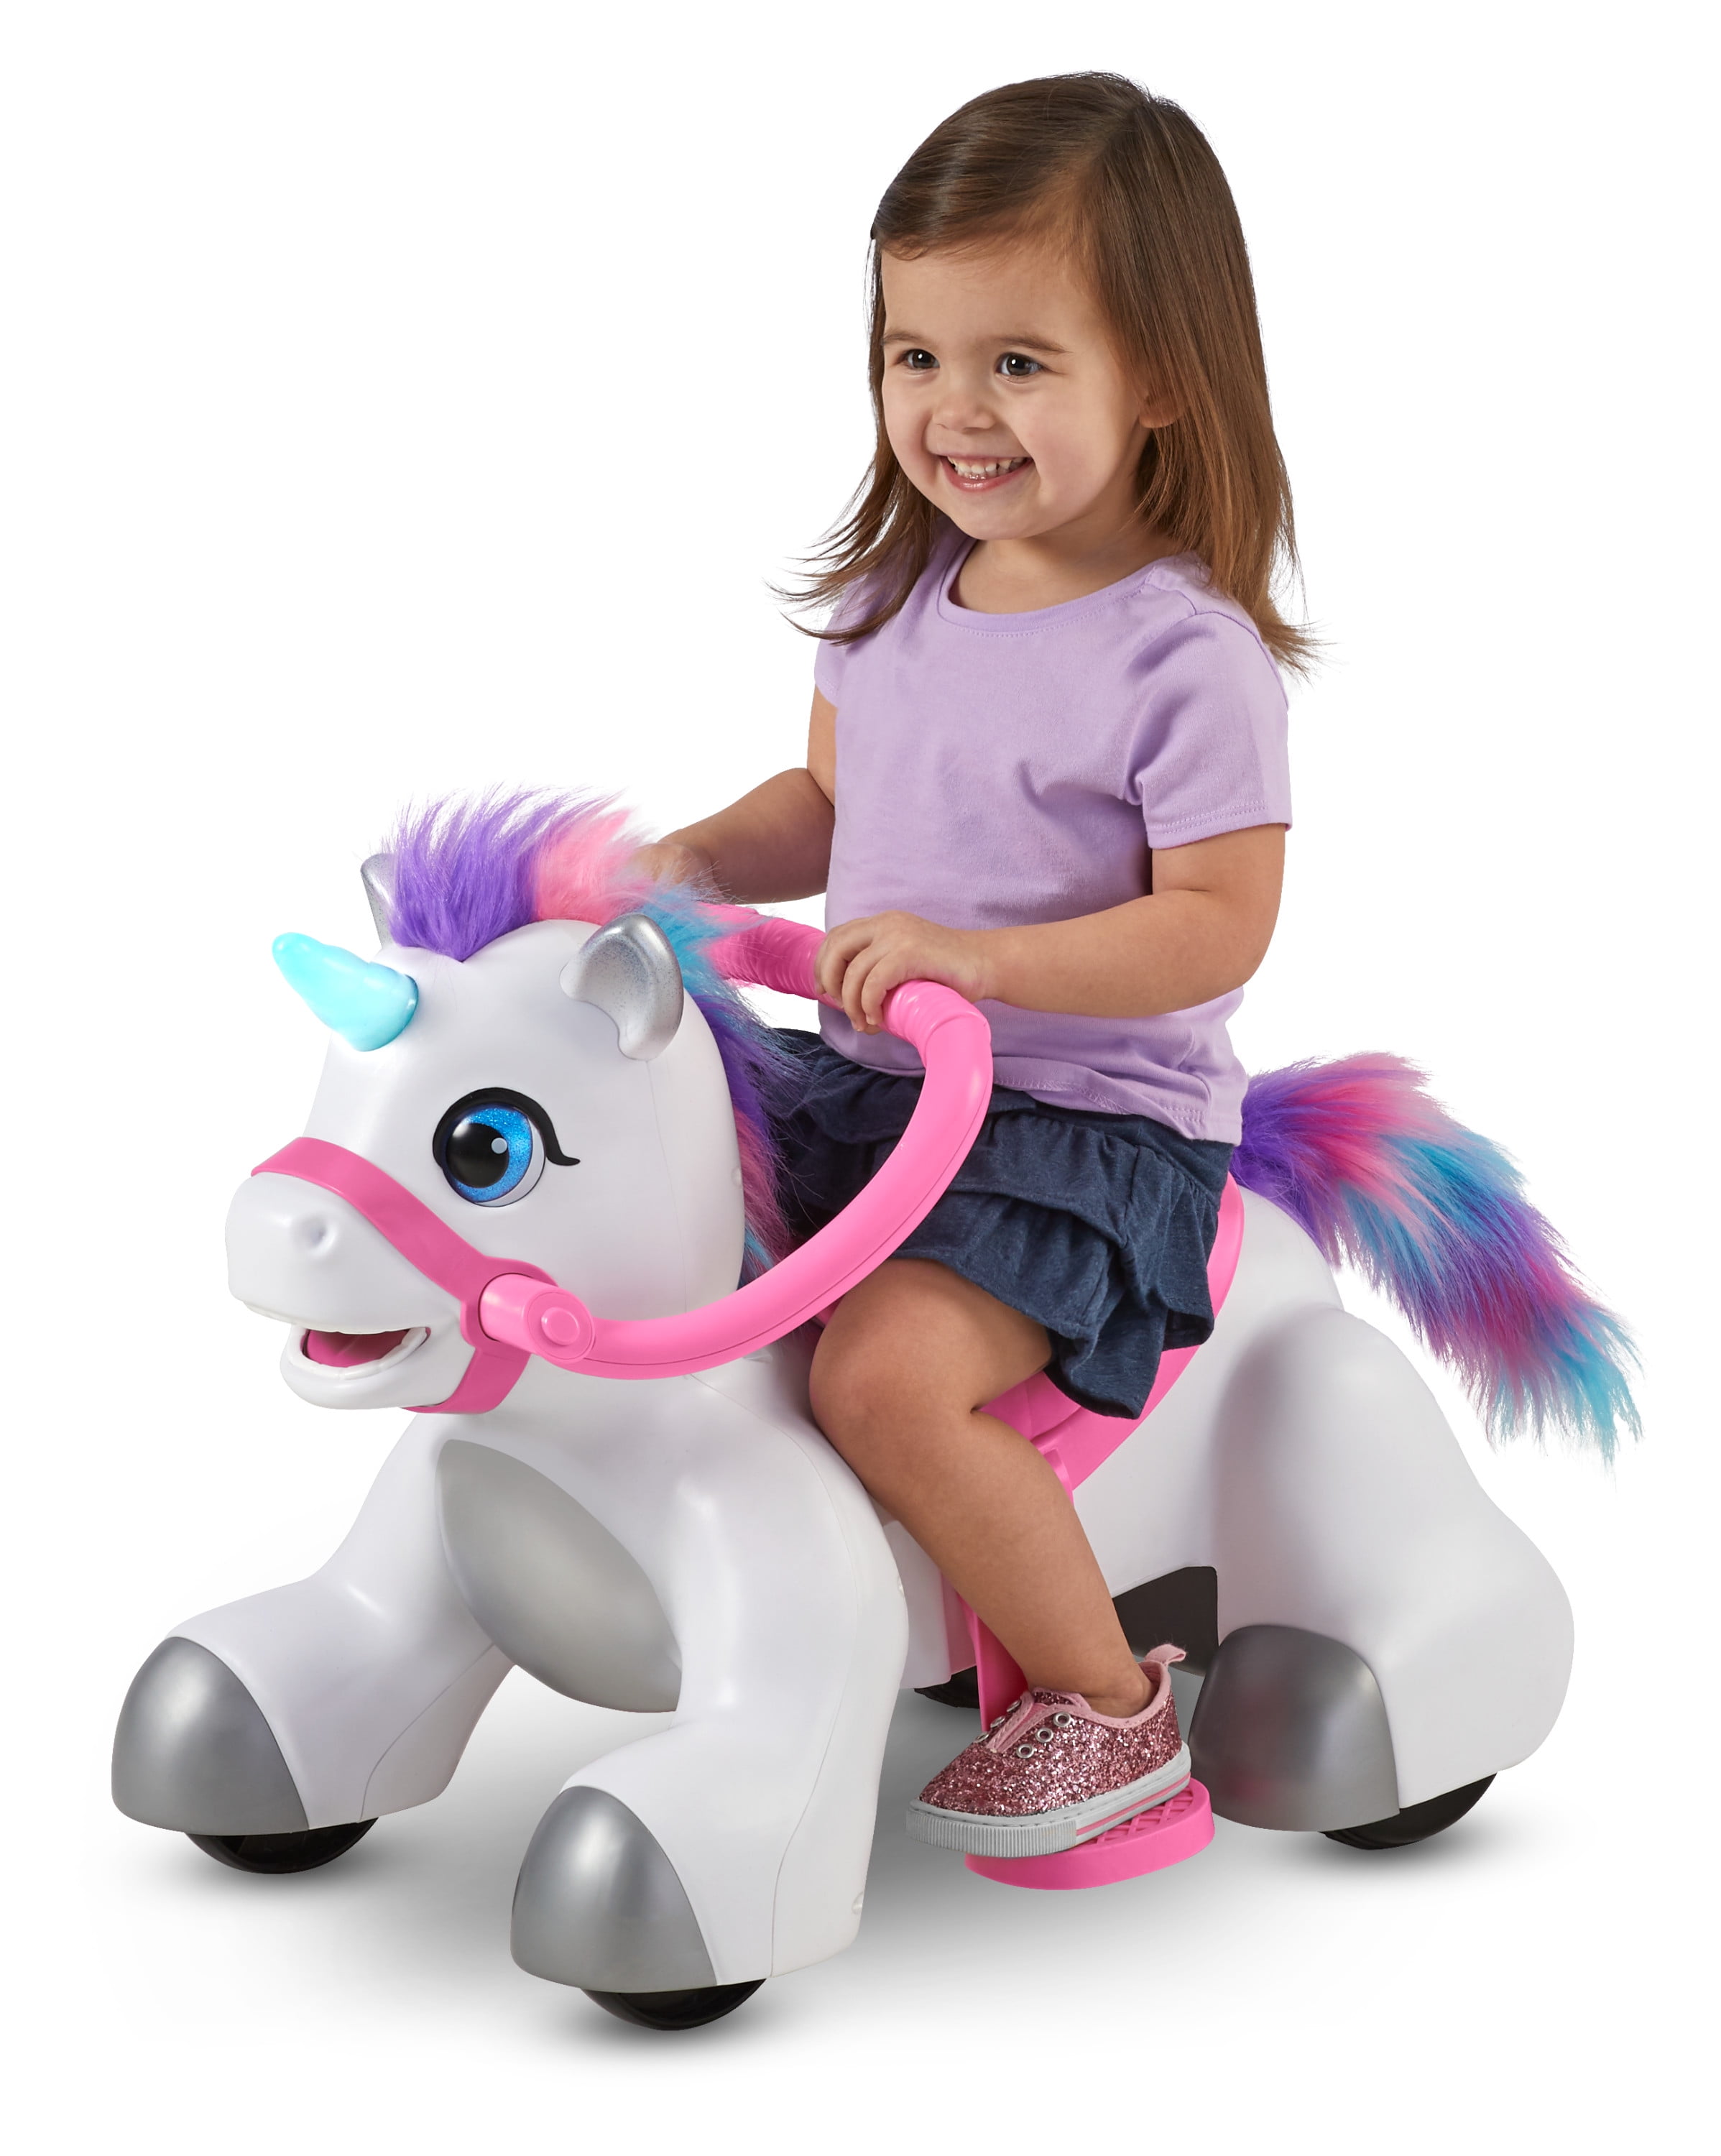 Unicorn Interactive Ride-On Toy For Toddlers Kid With Sounds /& Accessories Sets